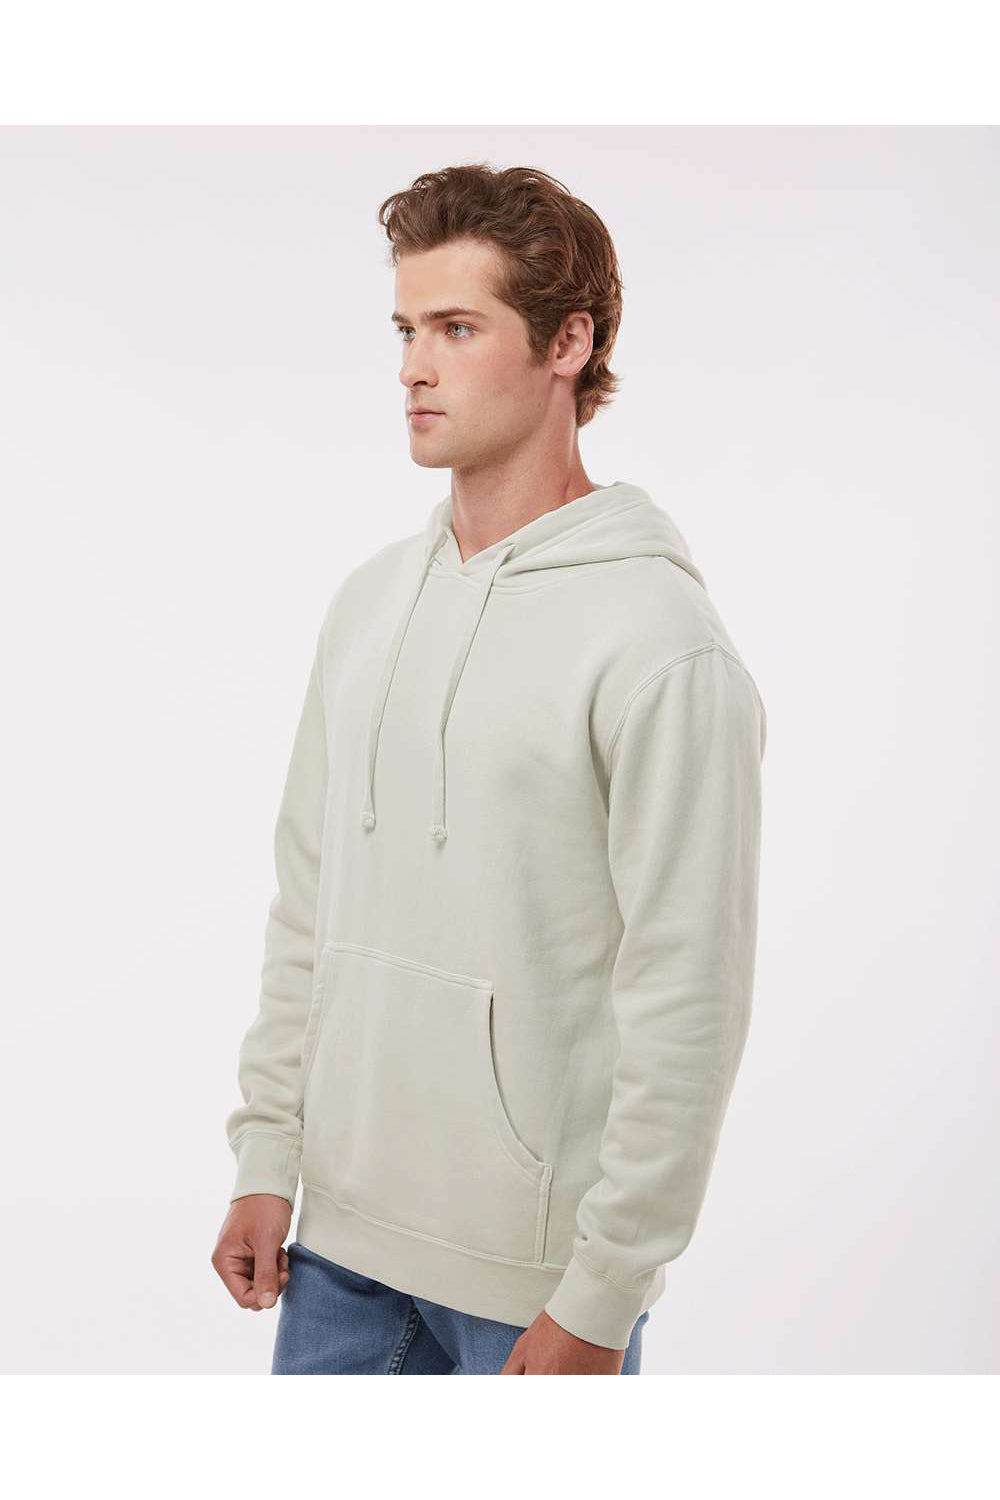 Independent Trading Co. PRM4500 Mens Pigment Dyed Hooded Sweatshirt Hoodie Ivory Model Side